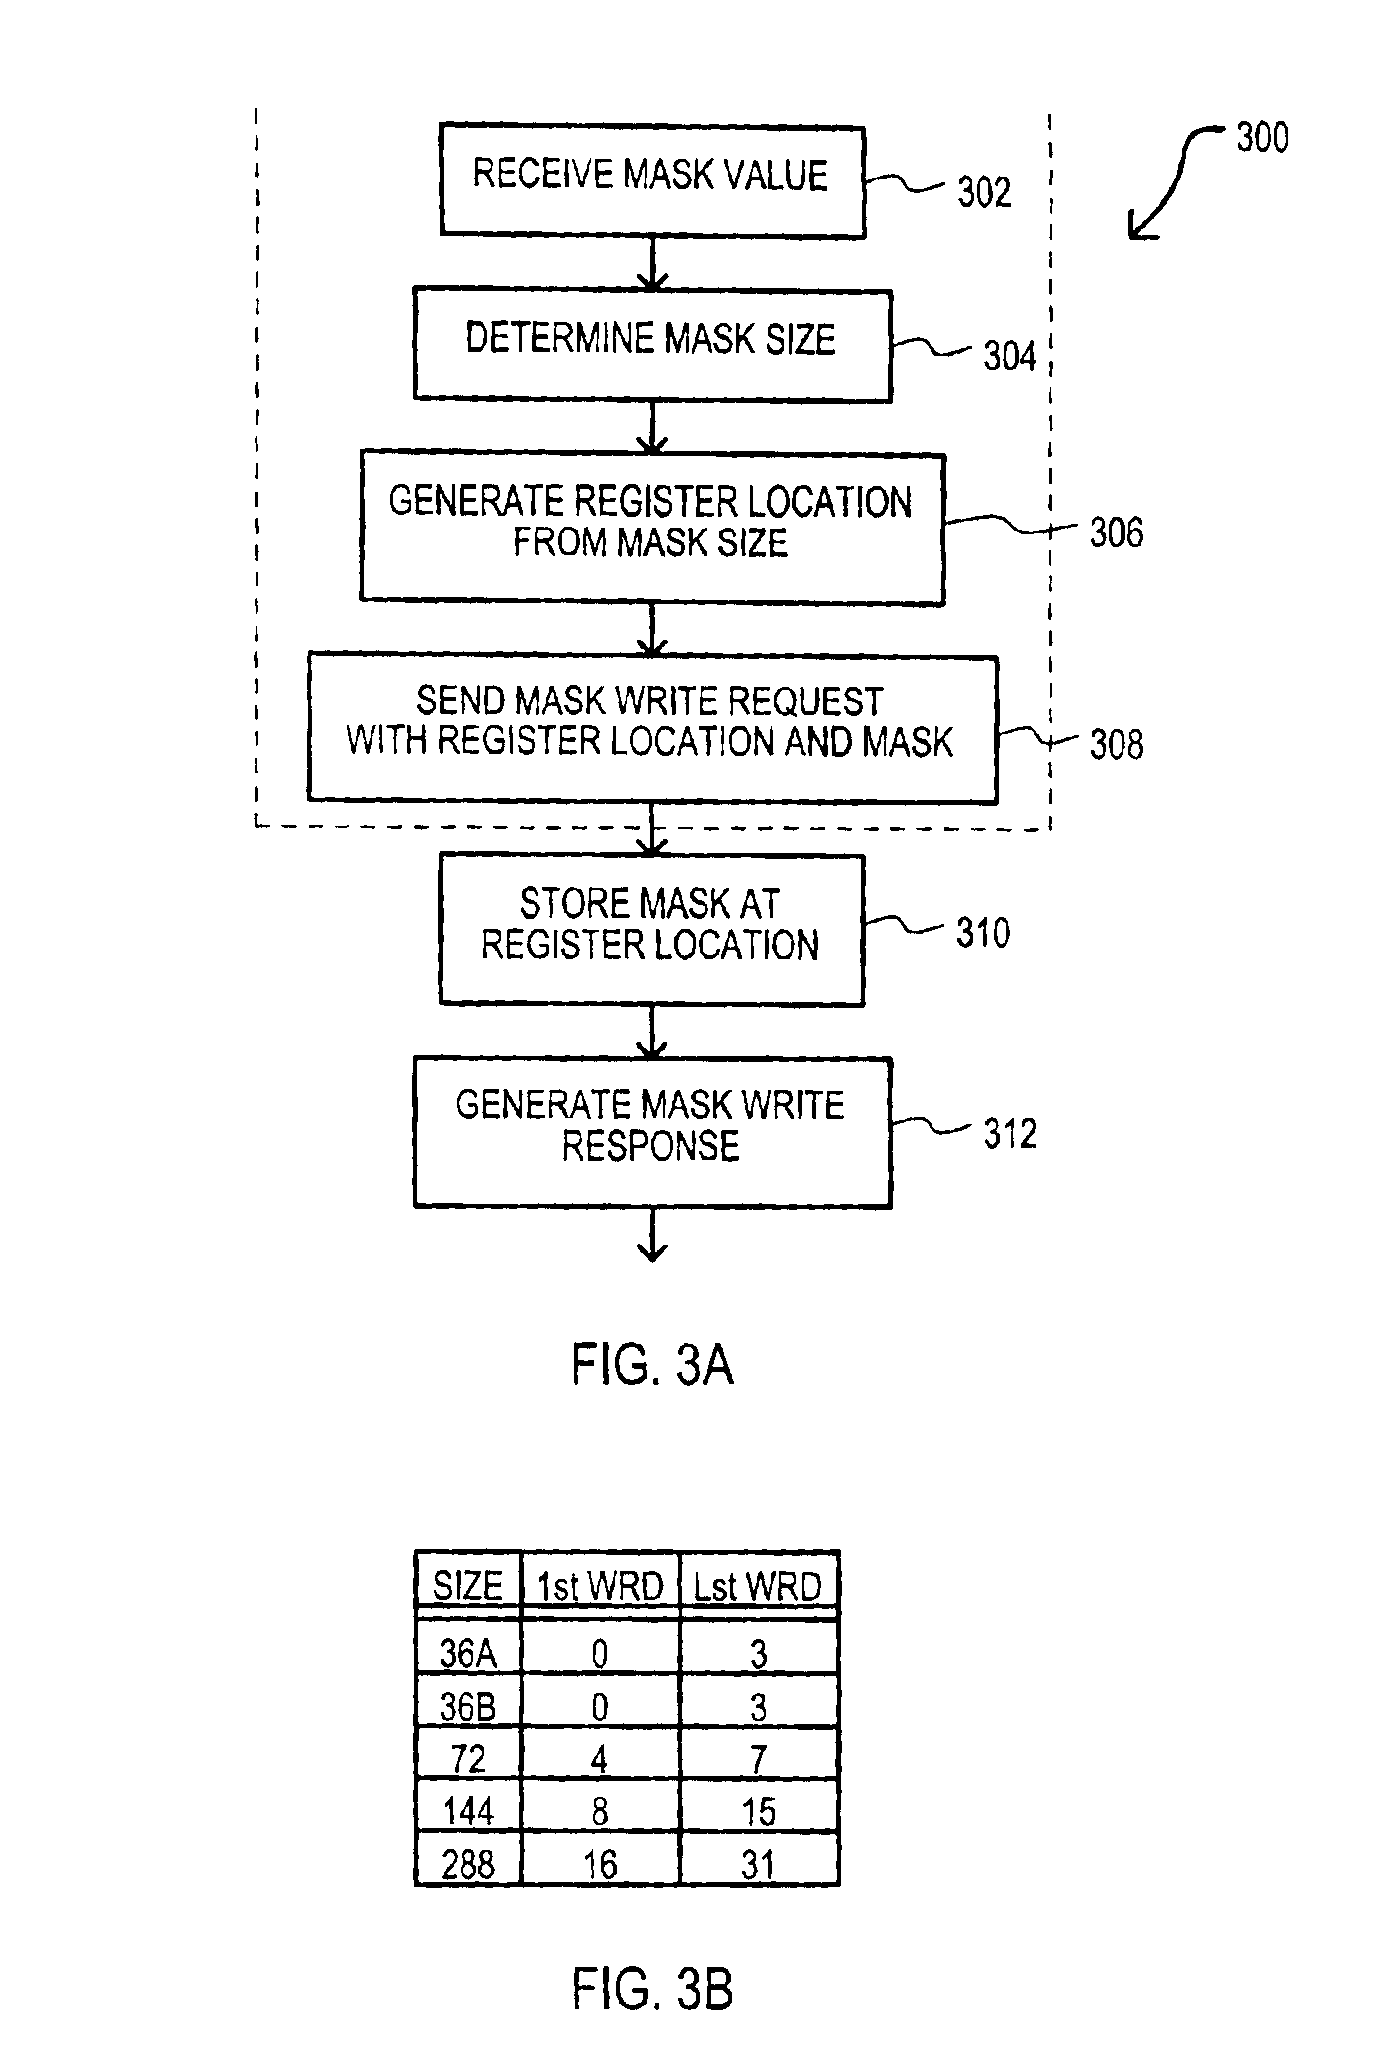 Method and apparatus for storing mask values in a content addressable memory (CAM) device